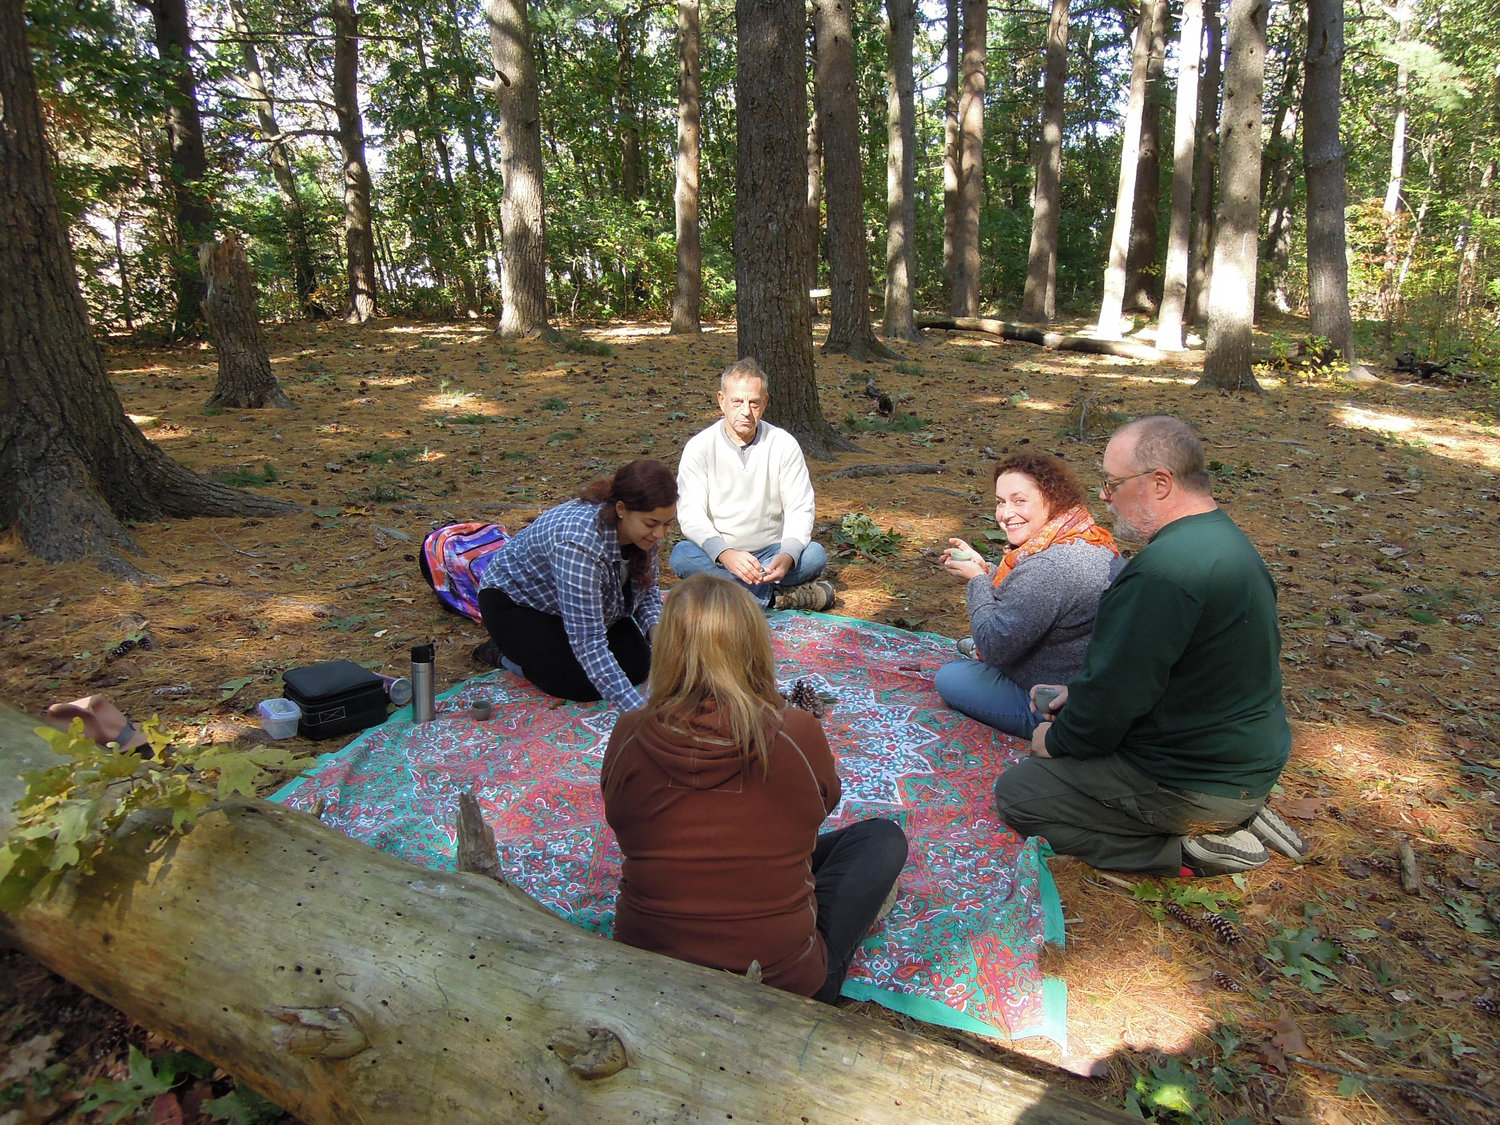 Teacher Stephanie Gaglione, far left, shared pine-needle tea and snacks with a group of students that included, clockwise from top, Les Schmerzler, Alicia Edwards, Chris Limbach and Maxine Schmerzler.